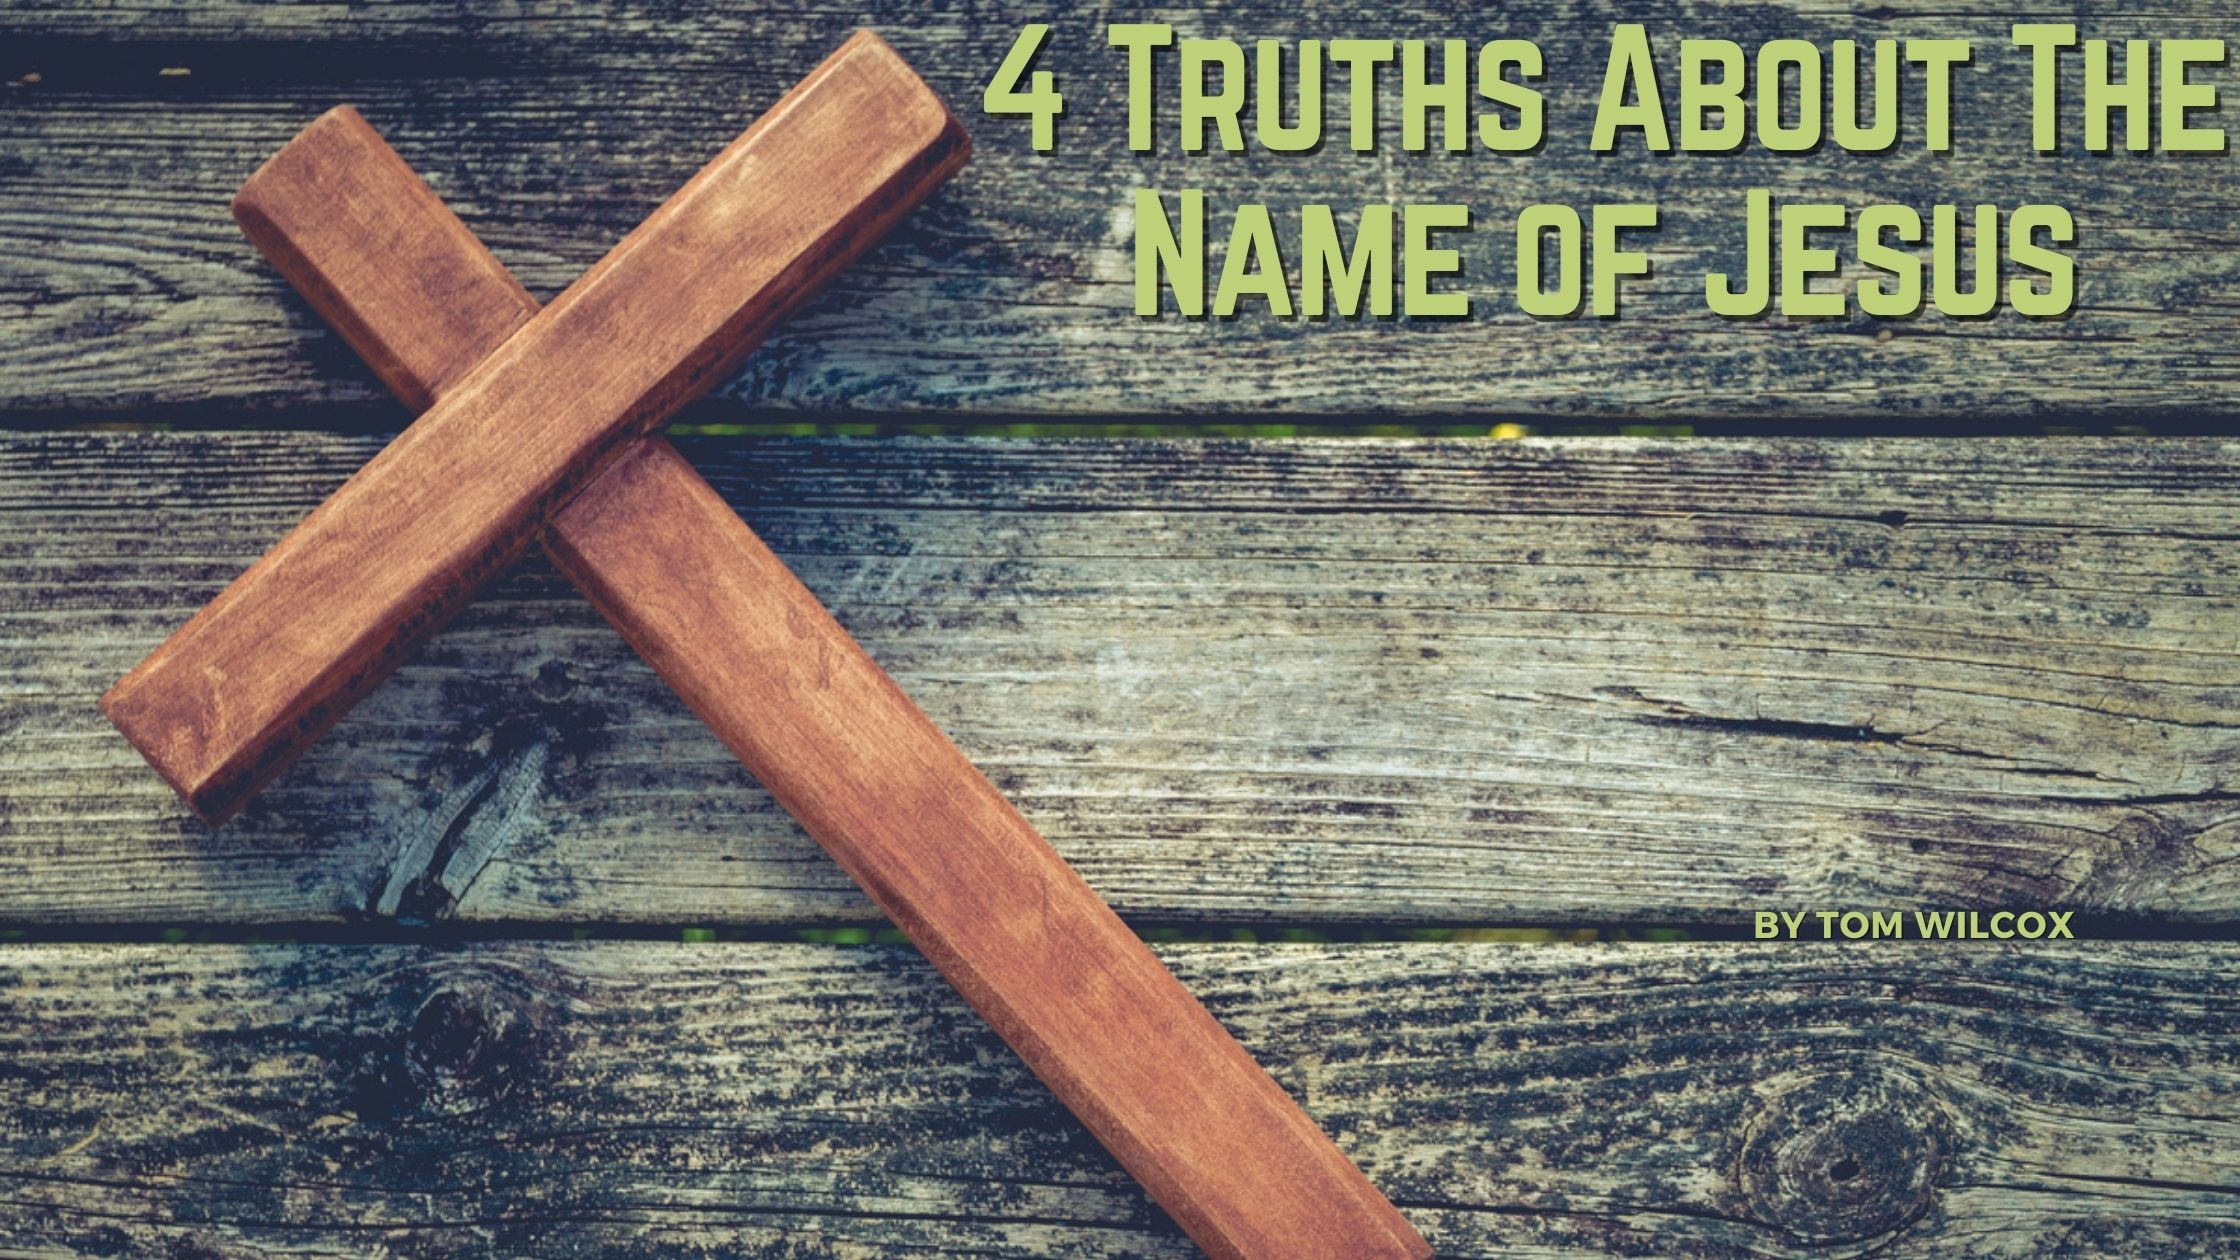 4 Truths About The Name of Jesus